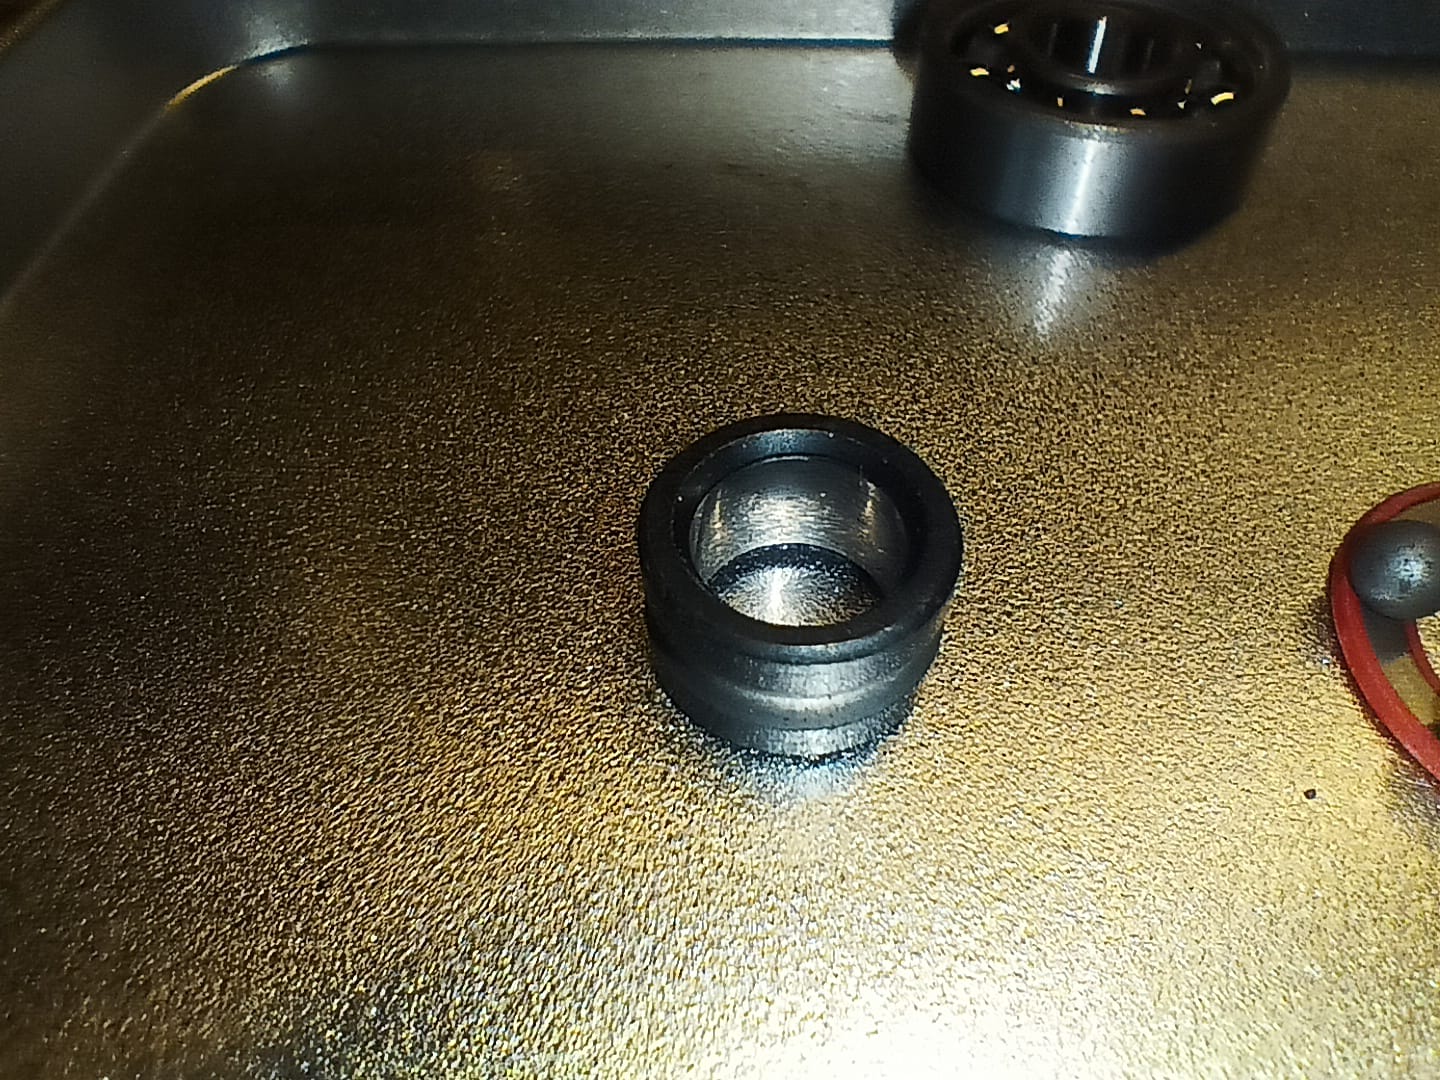 Skateboard wheels have 2 bearings each. These bearings are separated with a spacer.